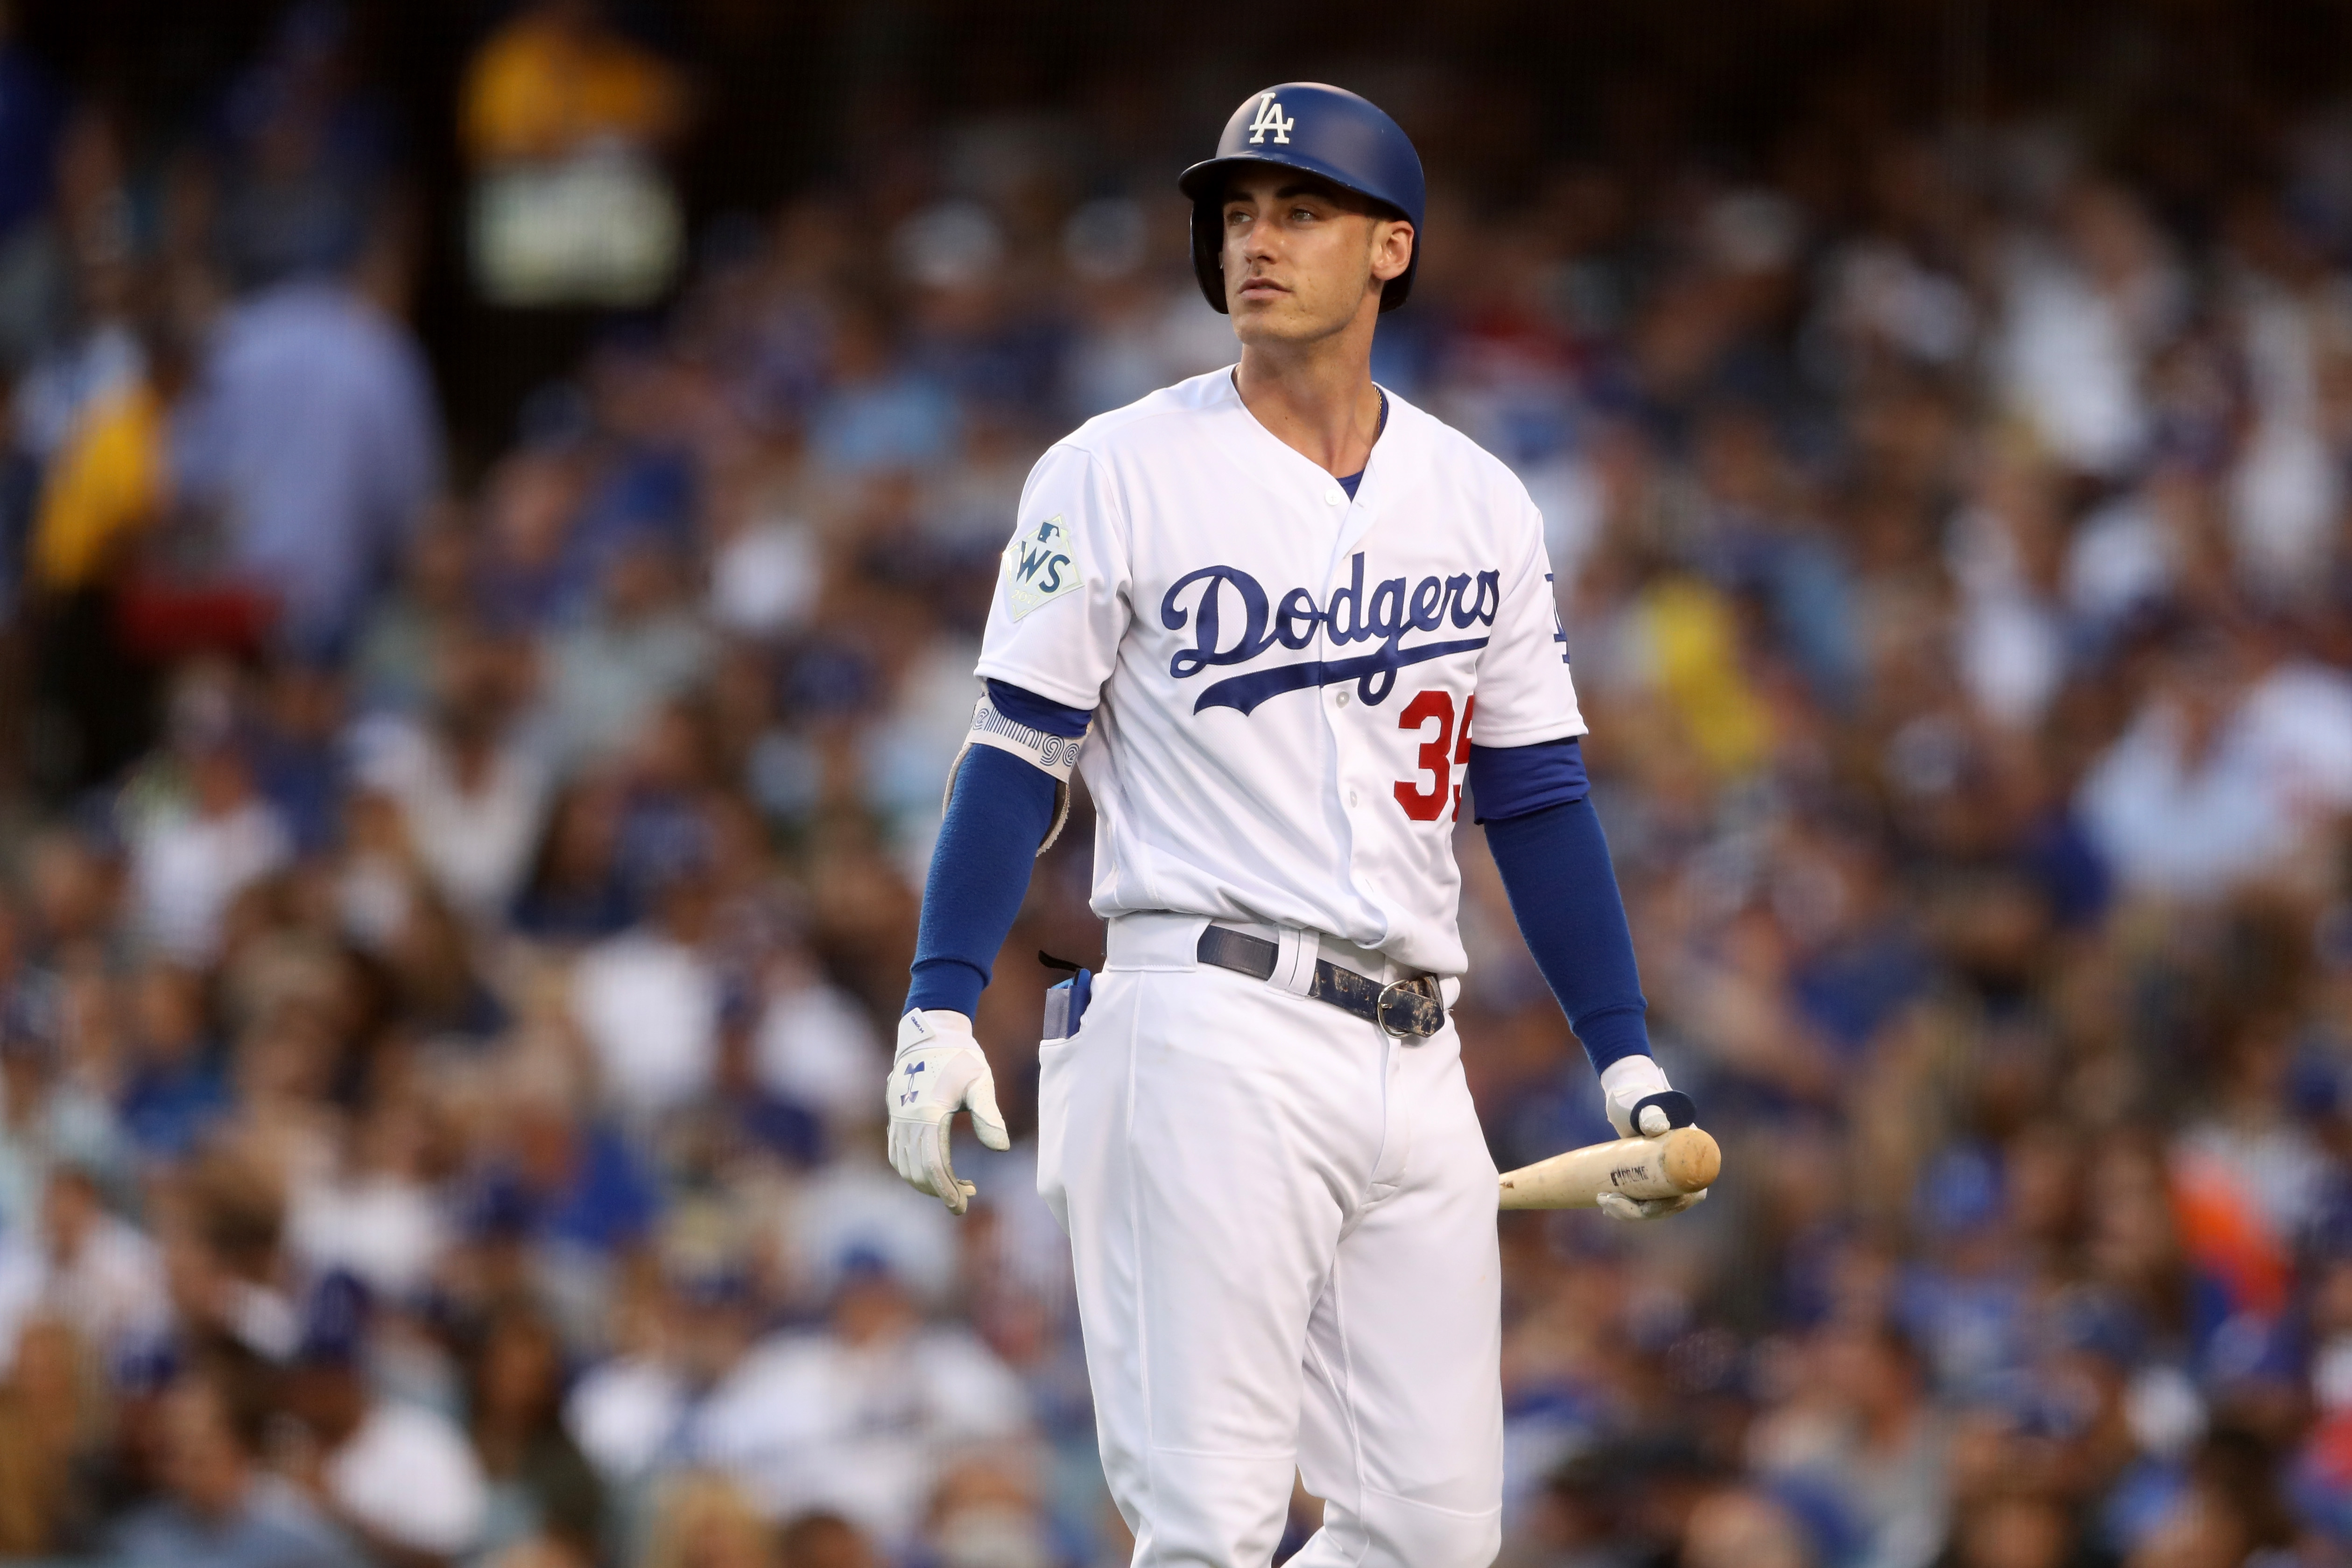 Cody Bellinger Breaks Through, Leading the Dodgers Past the Astros